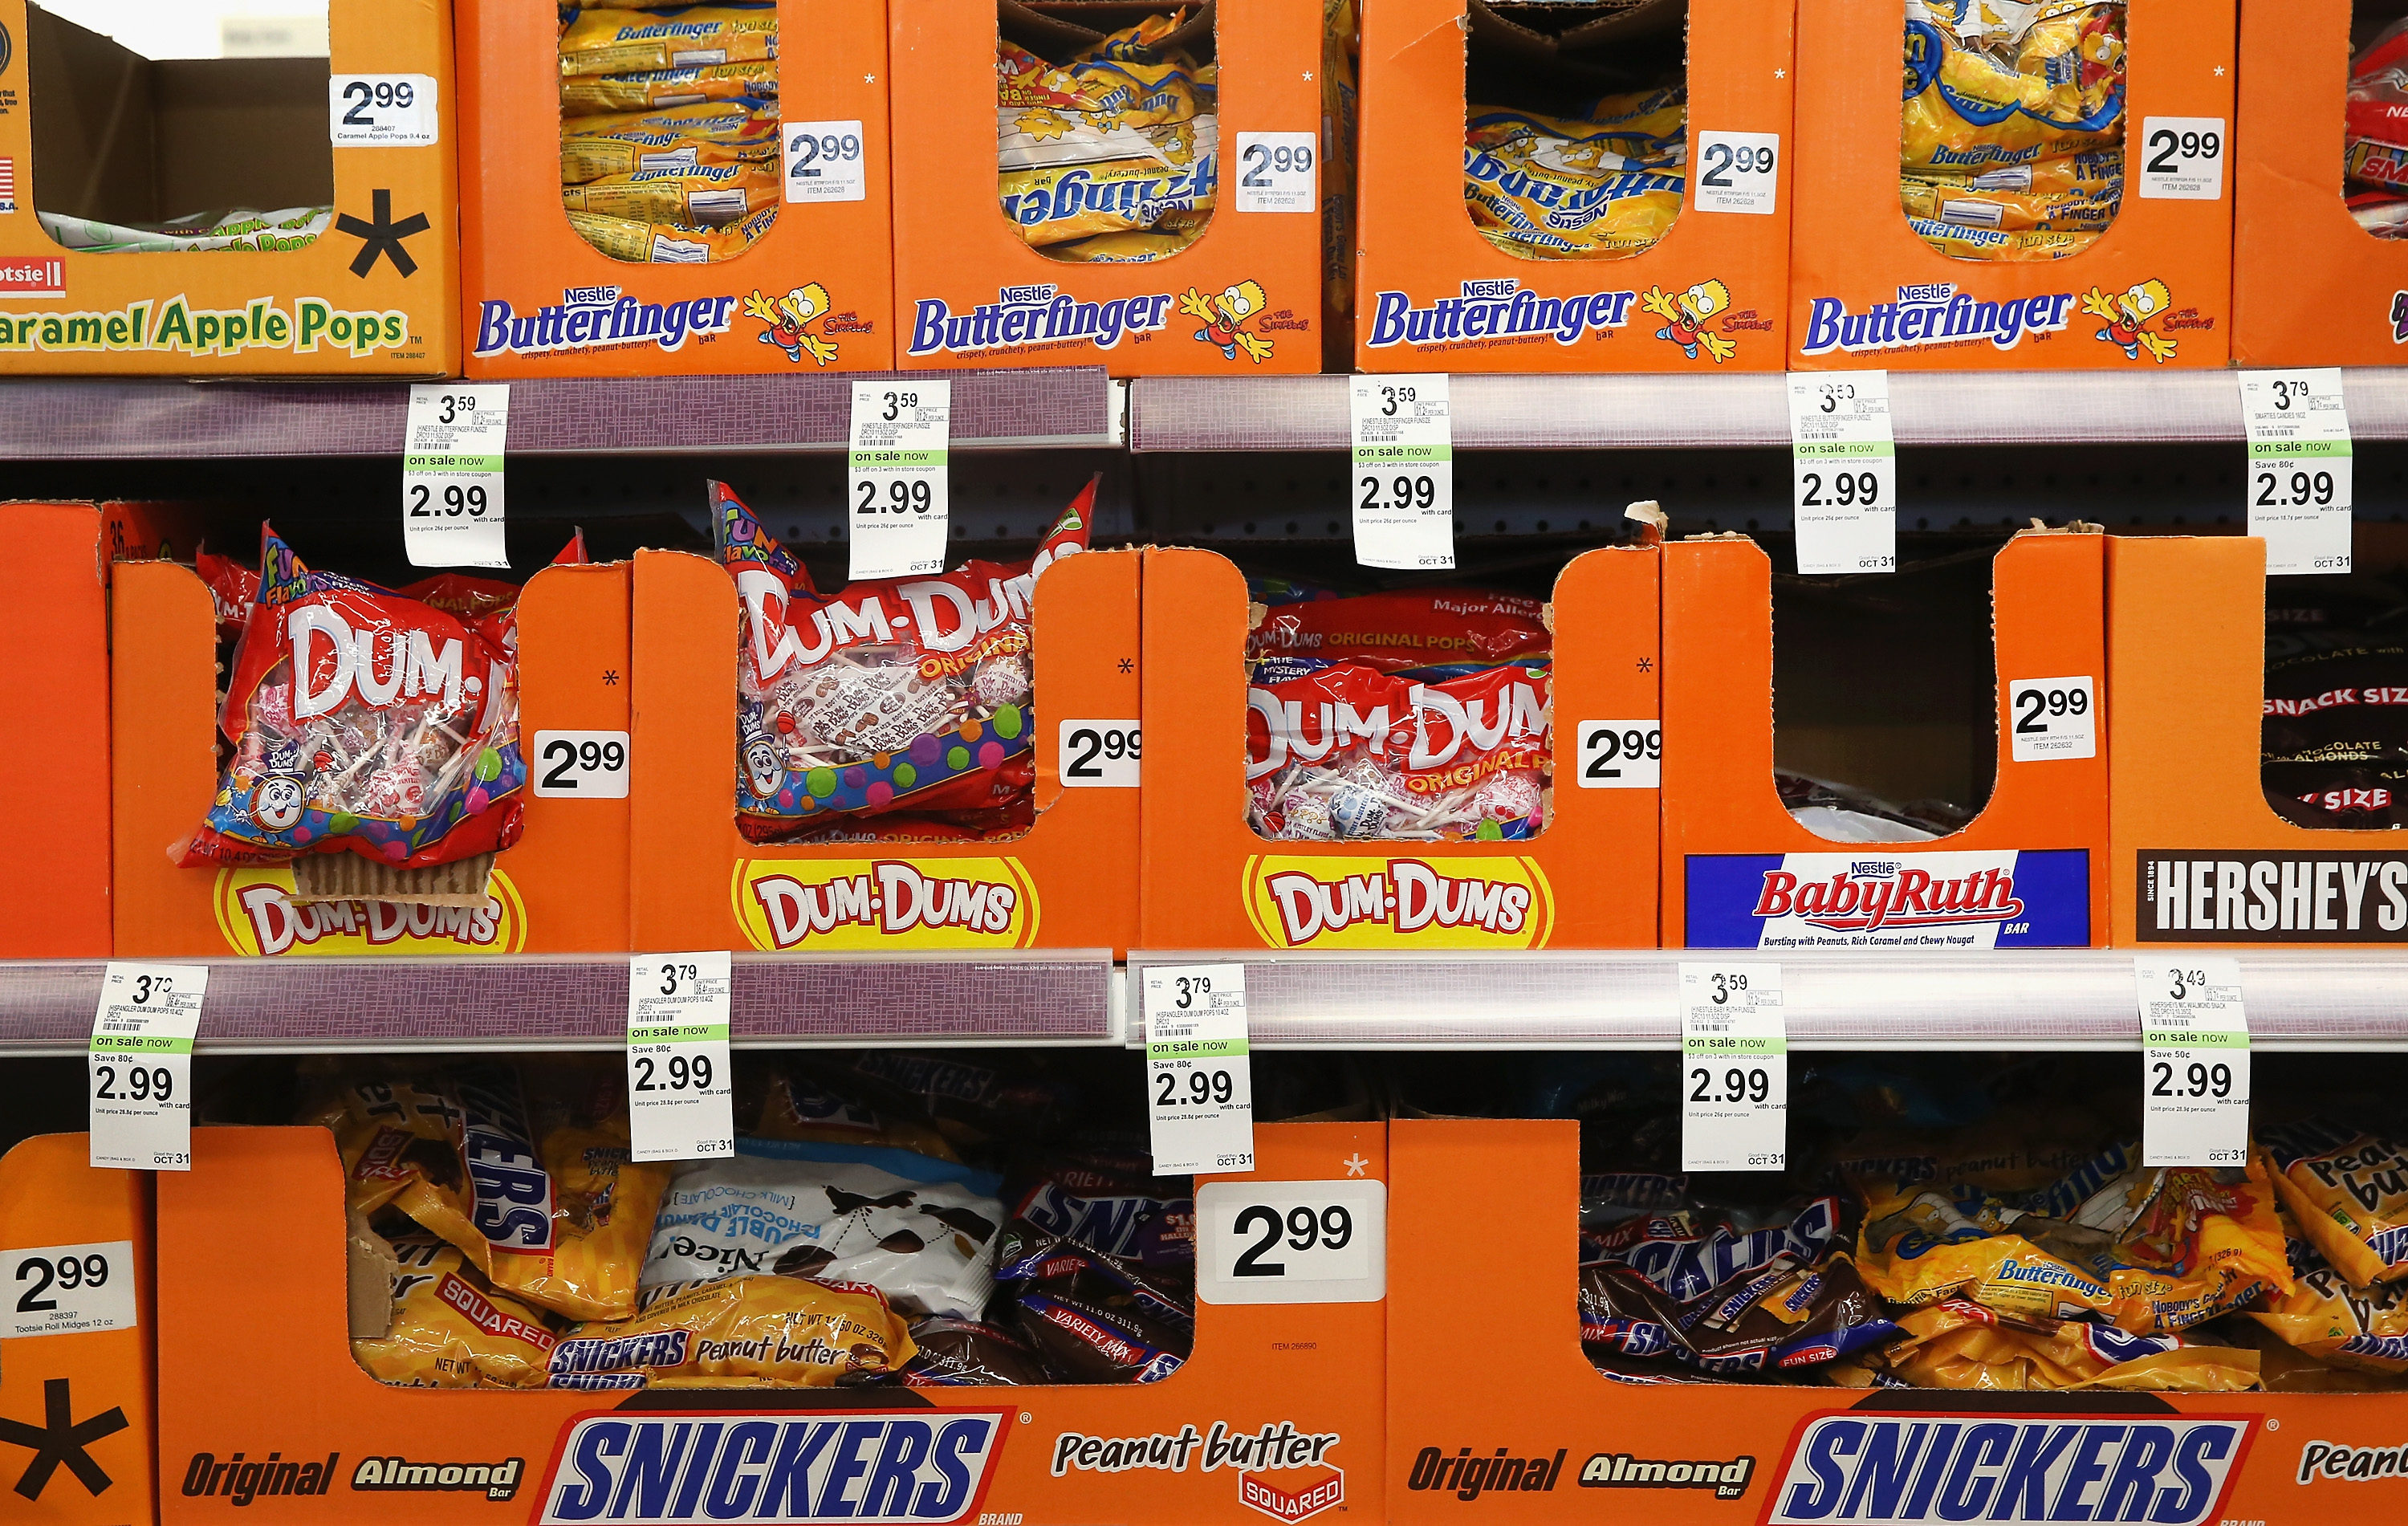 Where to Get the Best Deals on Halloween Candy This Year